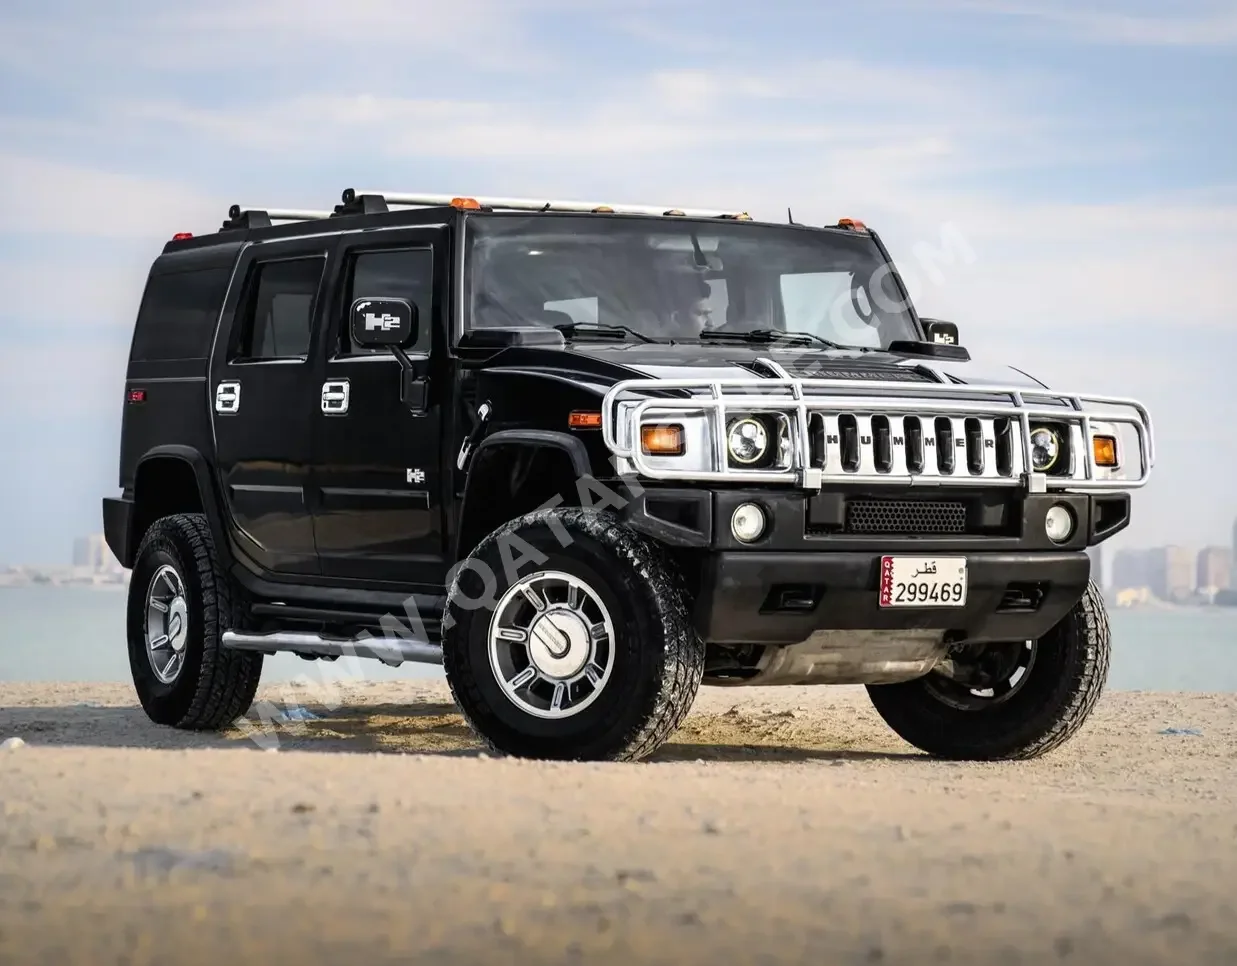 Hummer  H2  2005  Automatic  150,000 Km  8 Cylinder  All Wheel Drive (AWD)  SUV  Black